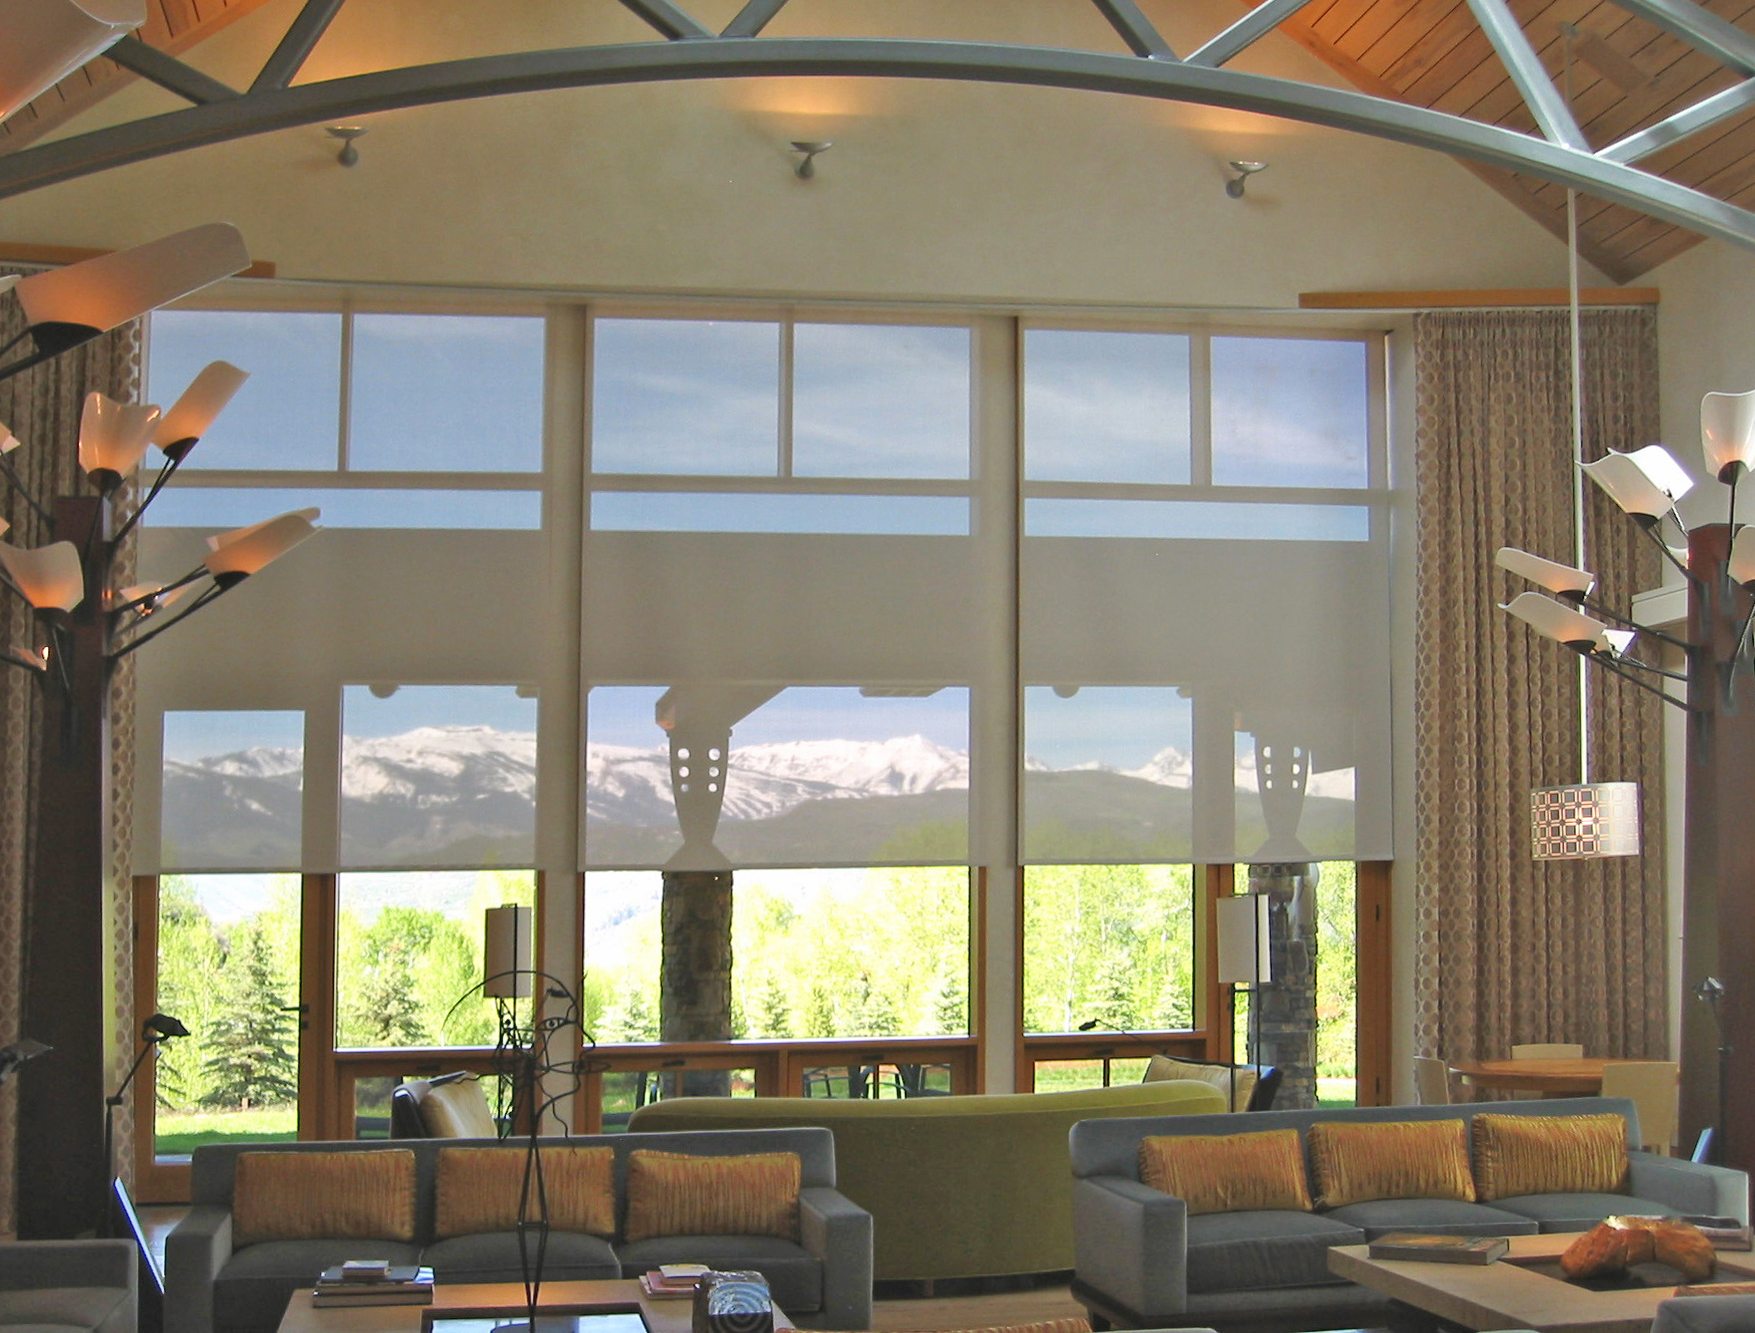 Screen roller shades in large room with mountain views.